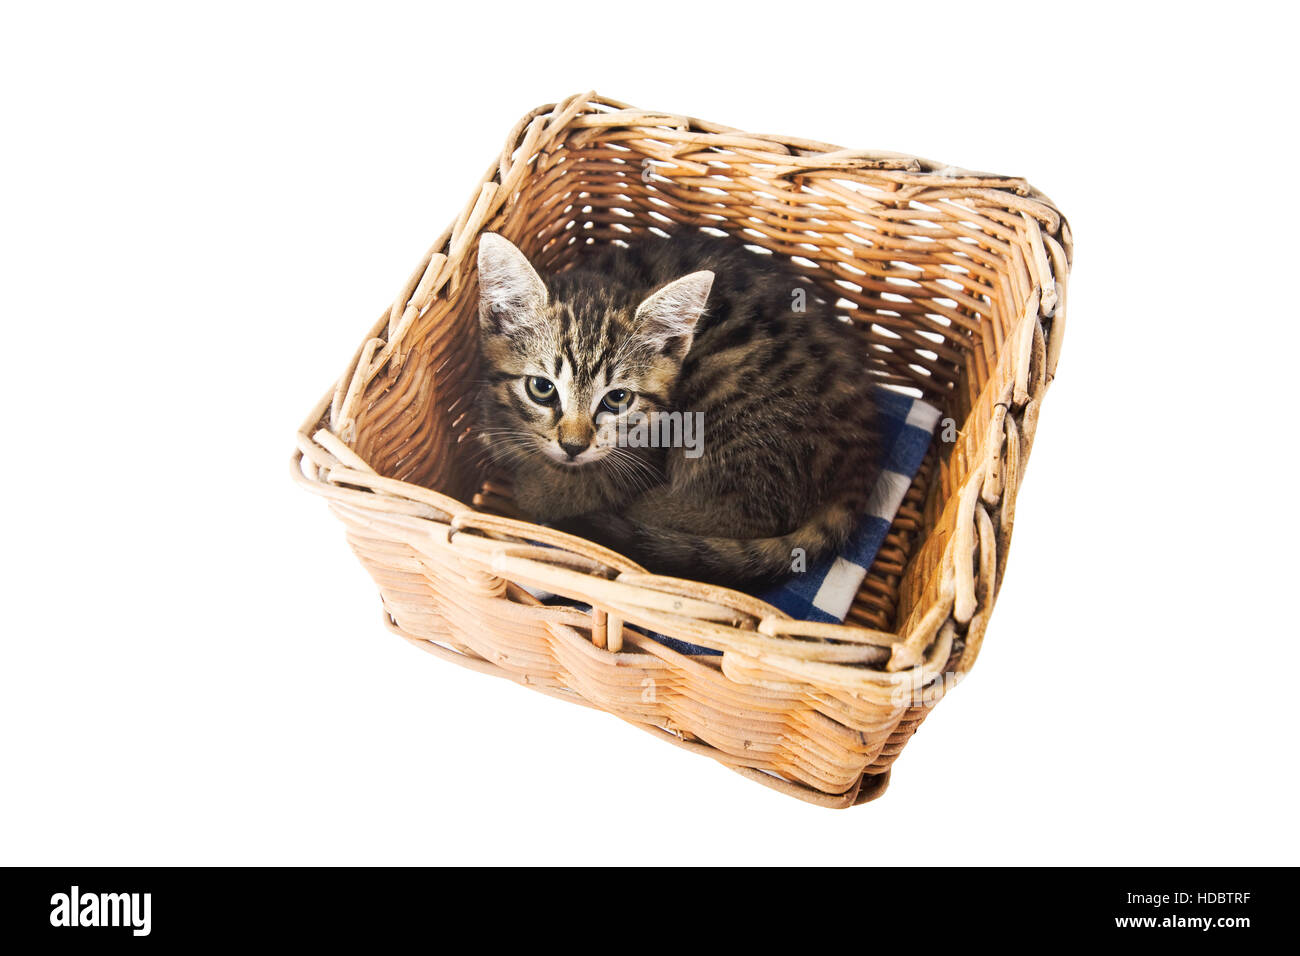 Domestic cat in a basket Stock Photo